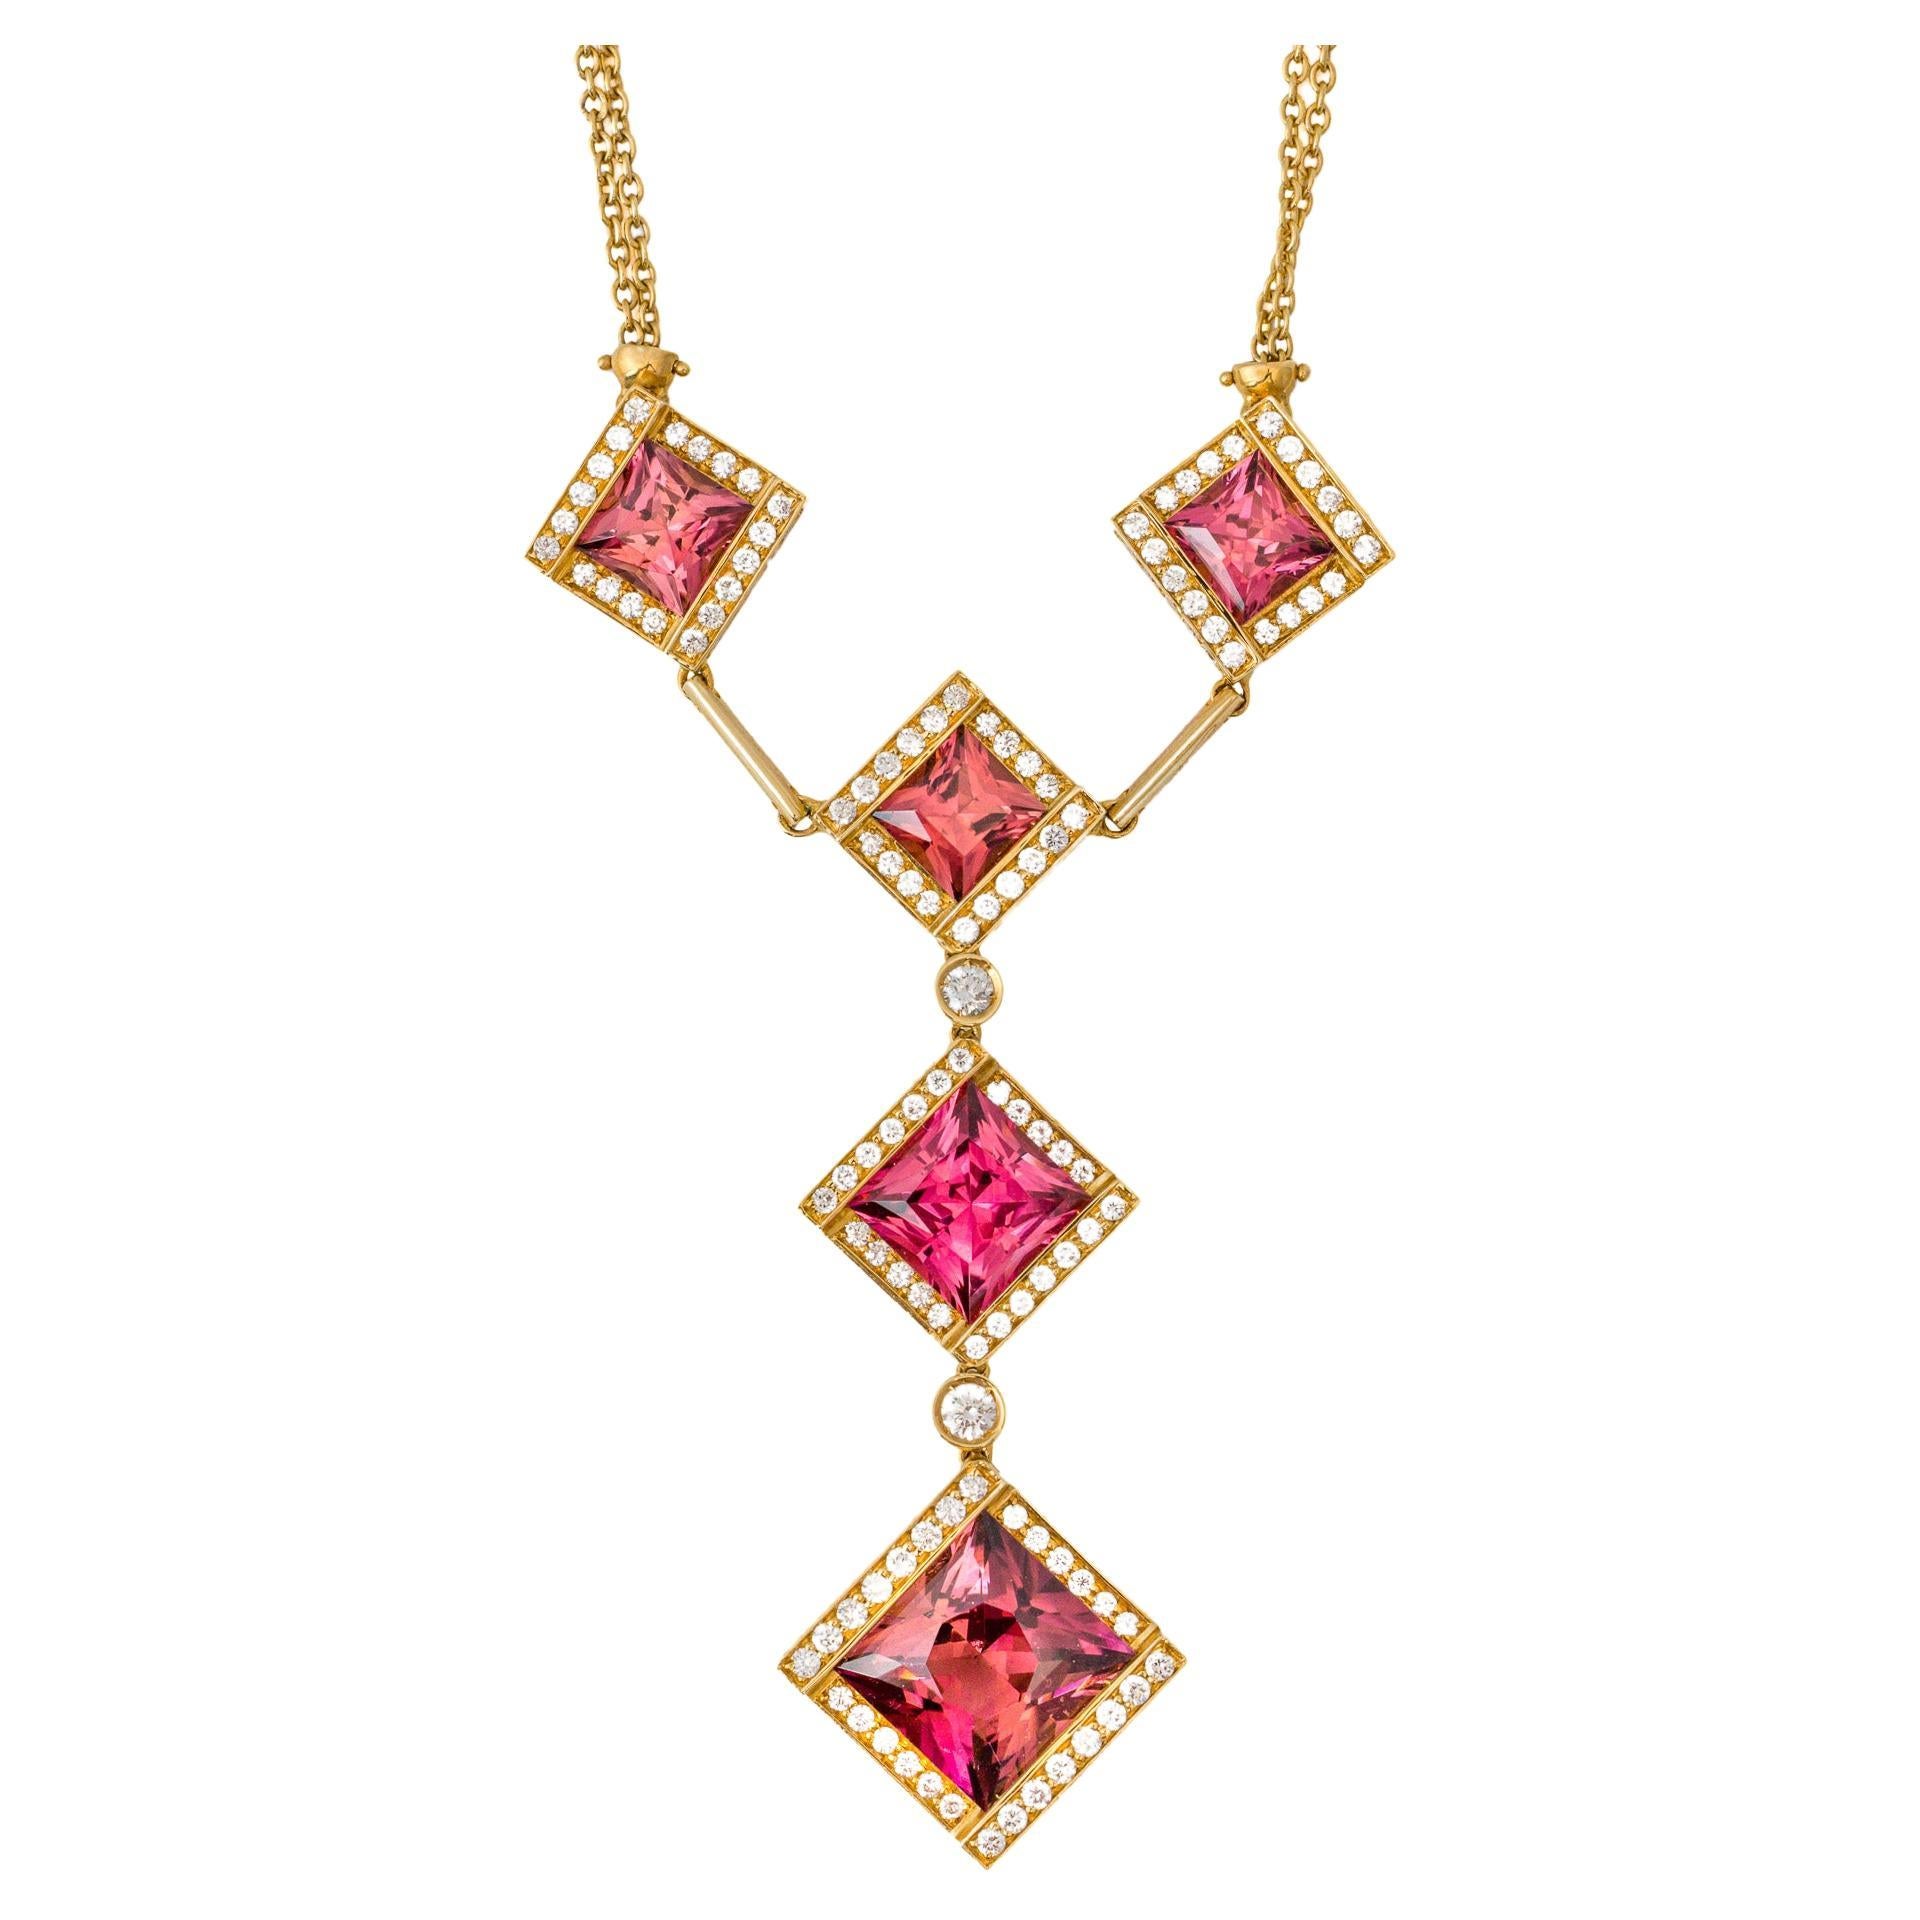 "Costis" Square In Motion Necklace with 11.13 carats Pink Tourmalines, Diamonds